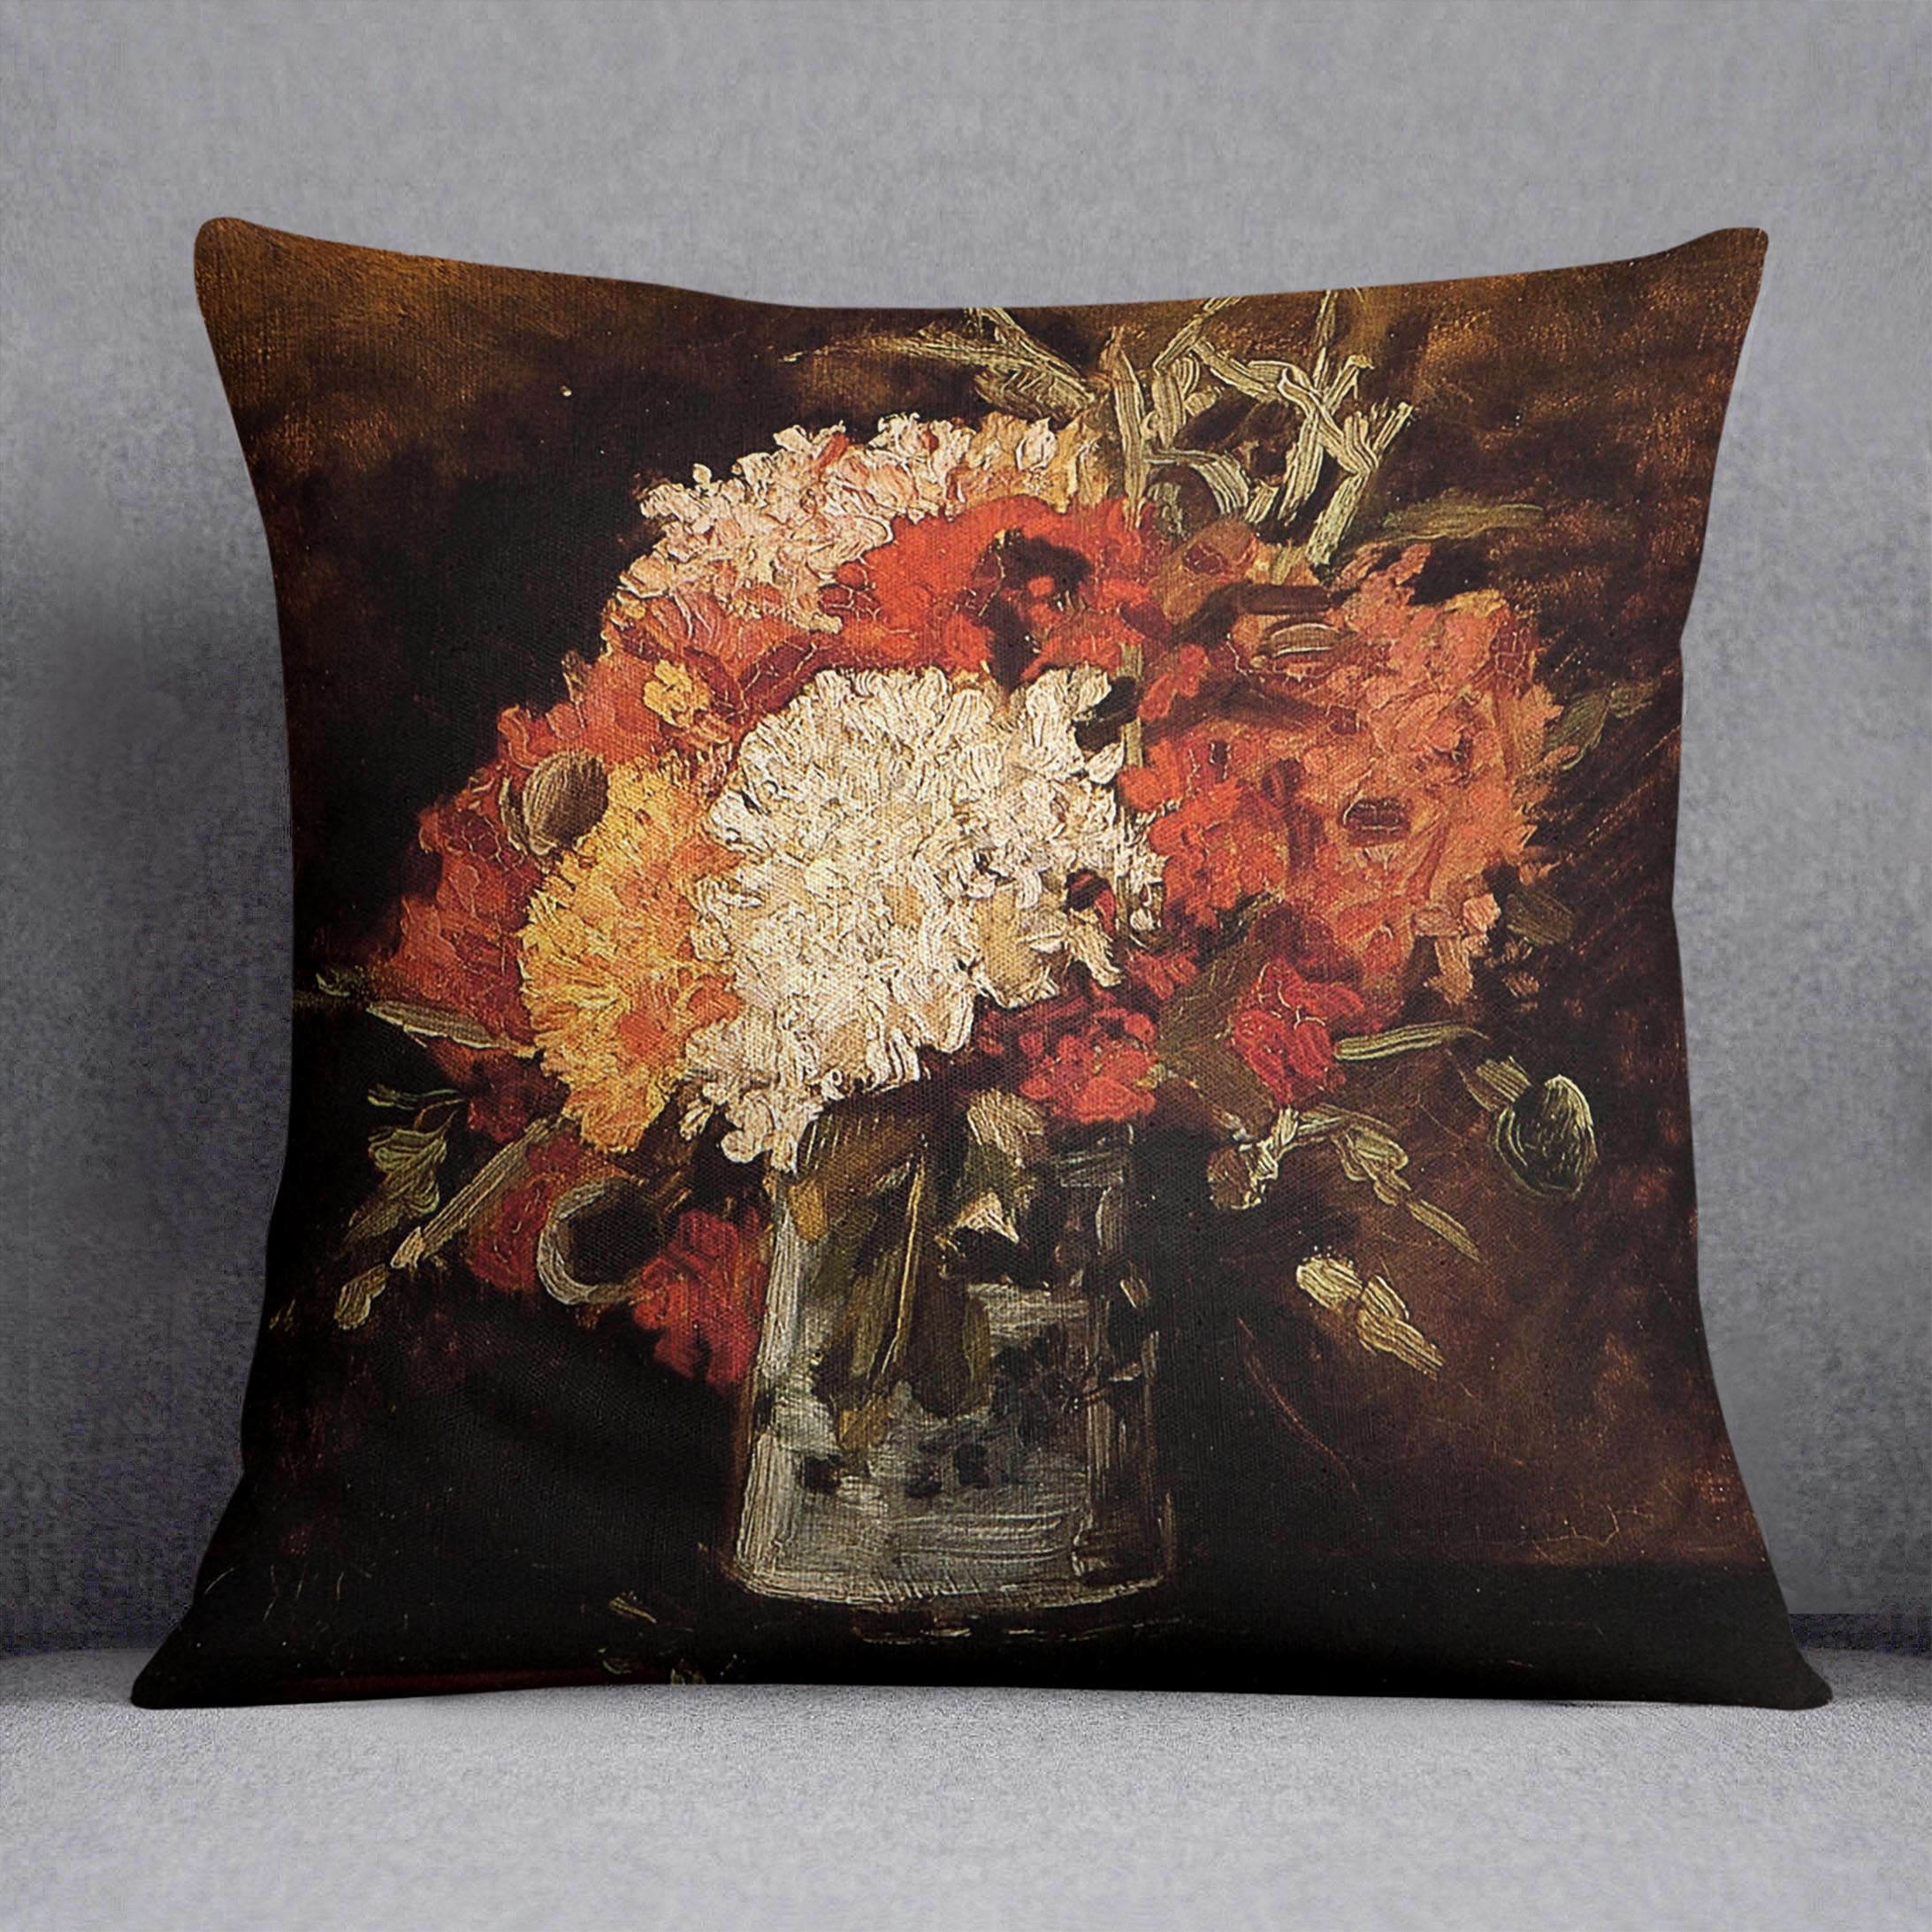 Vase with Carnations by Van Gogh Cushion